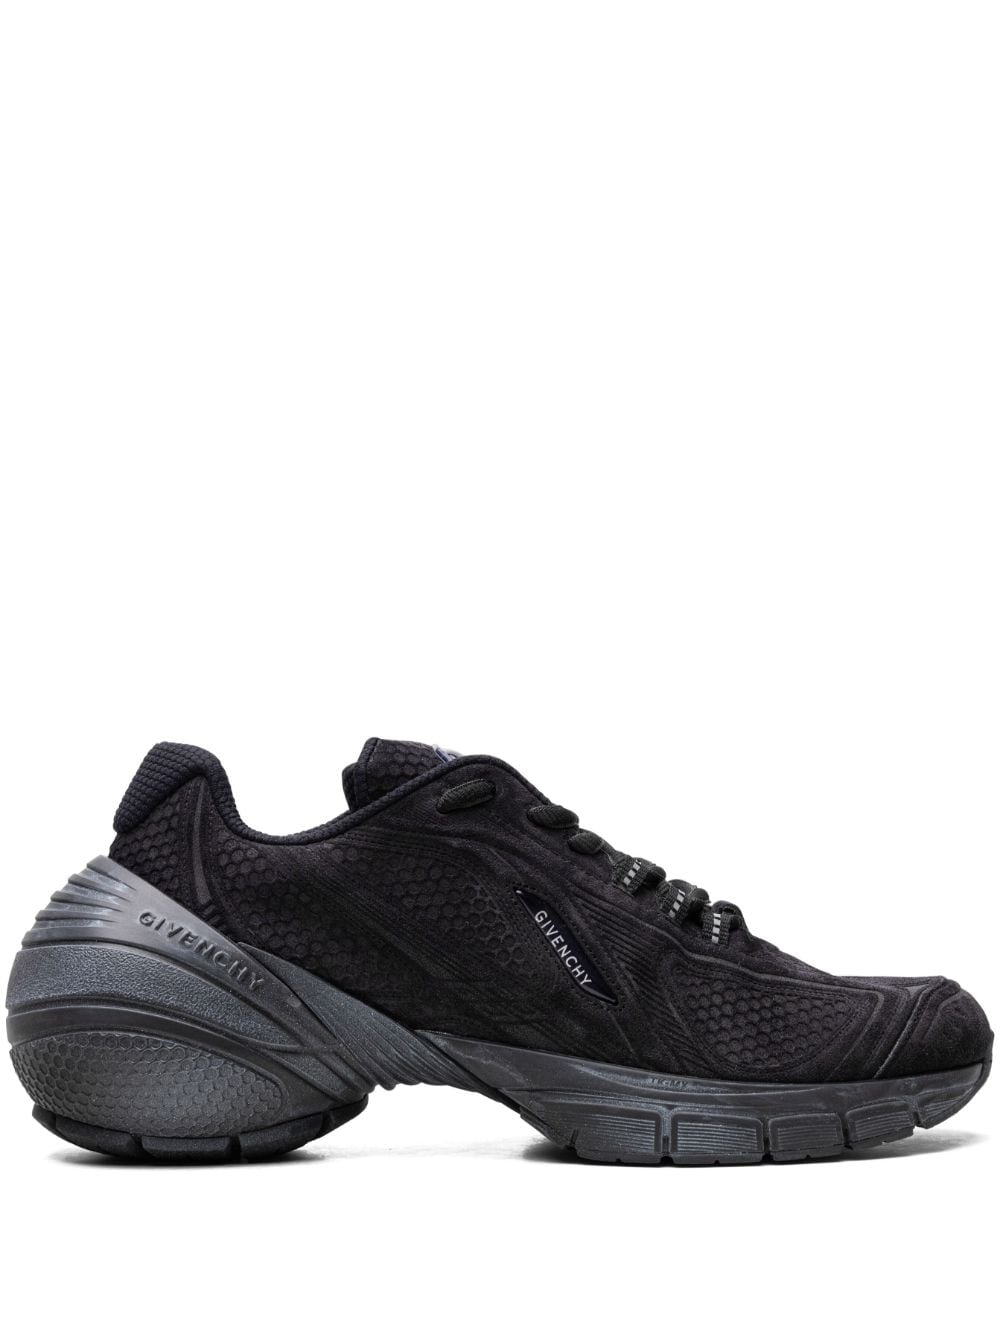 Givenchy Tk-mx Runner Panelled-design Sneakers In Black